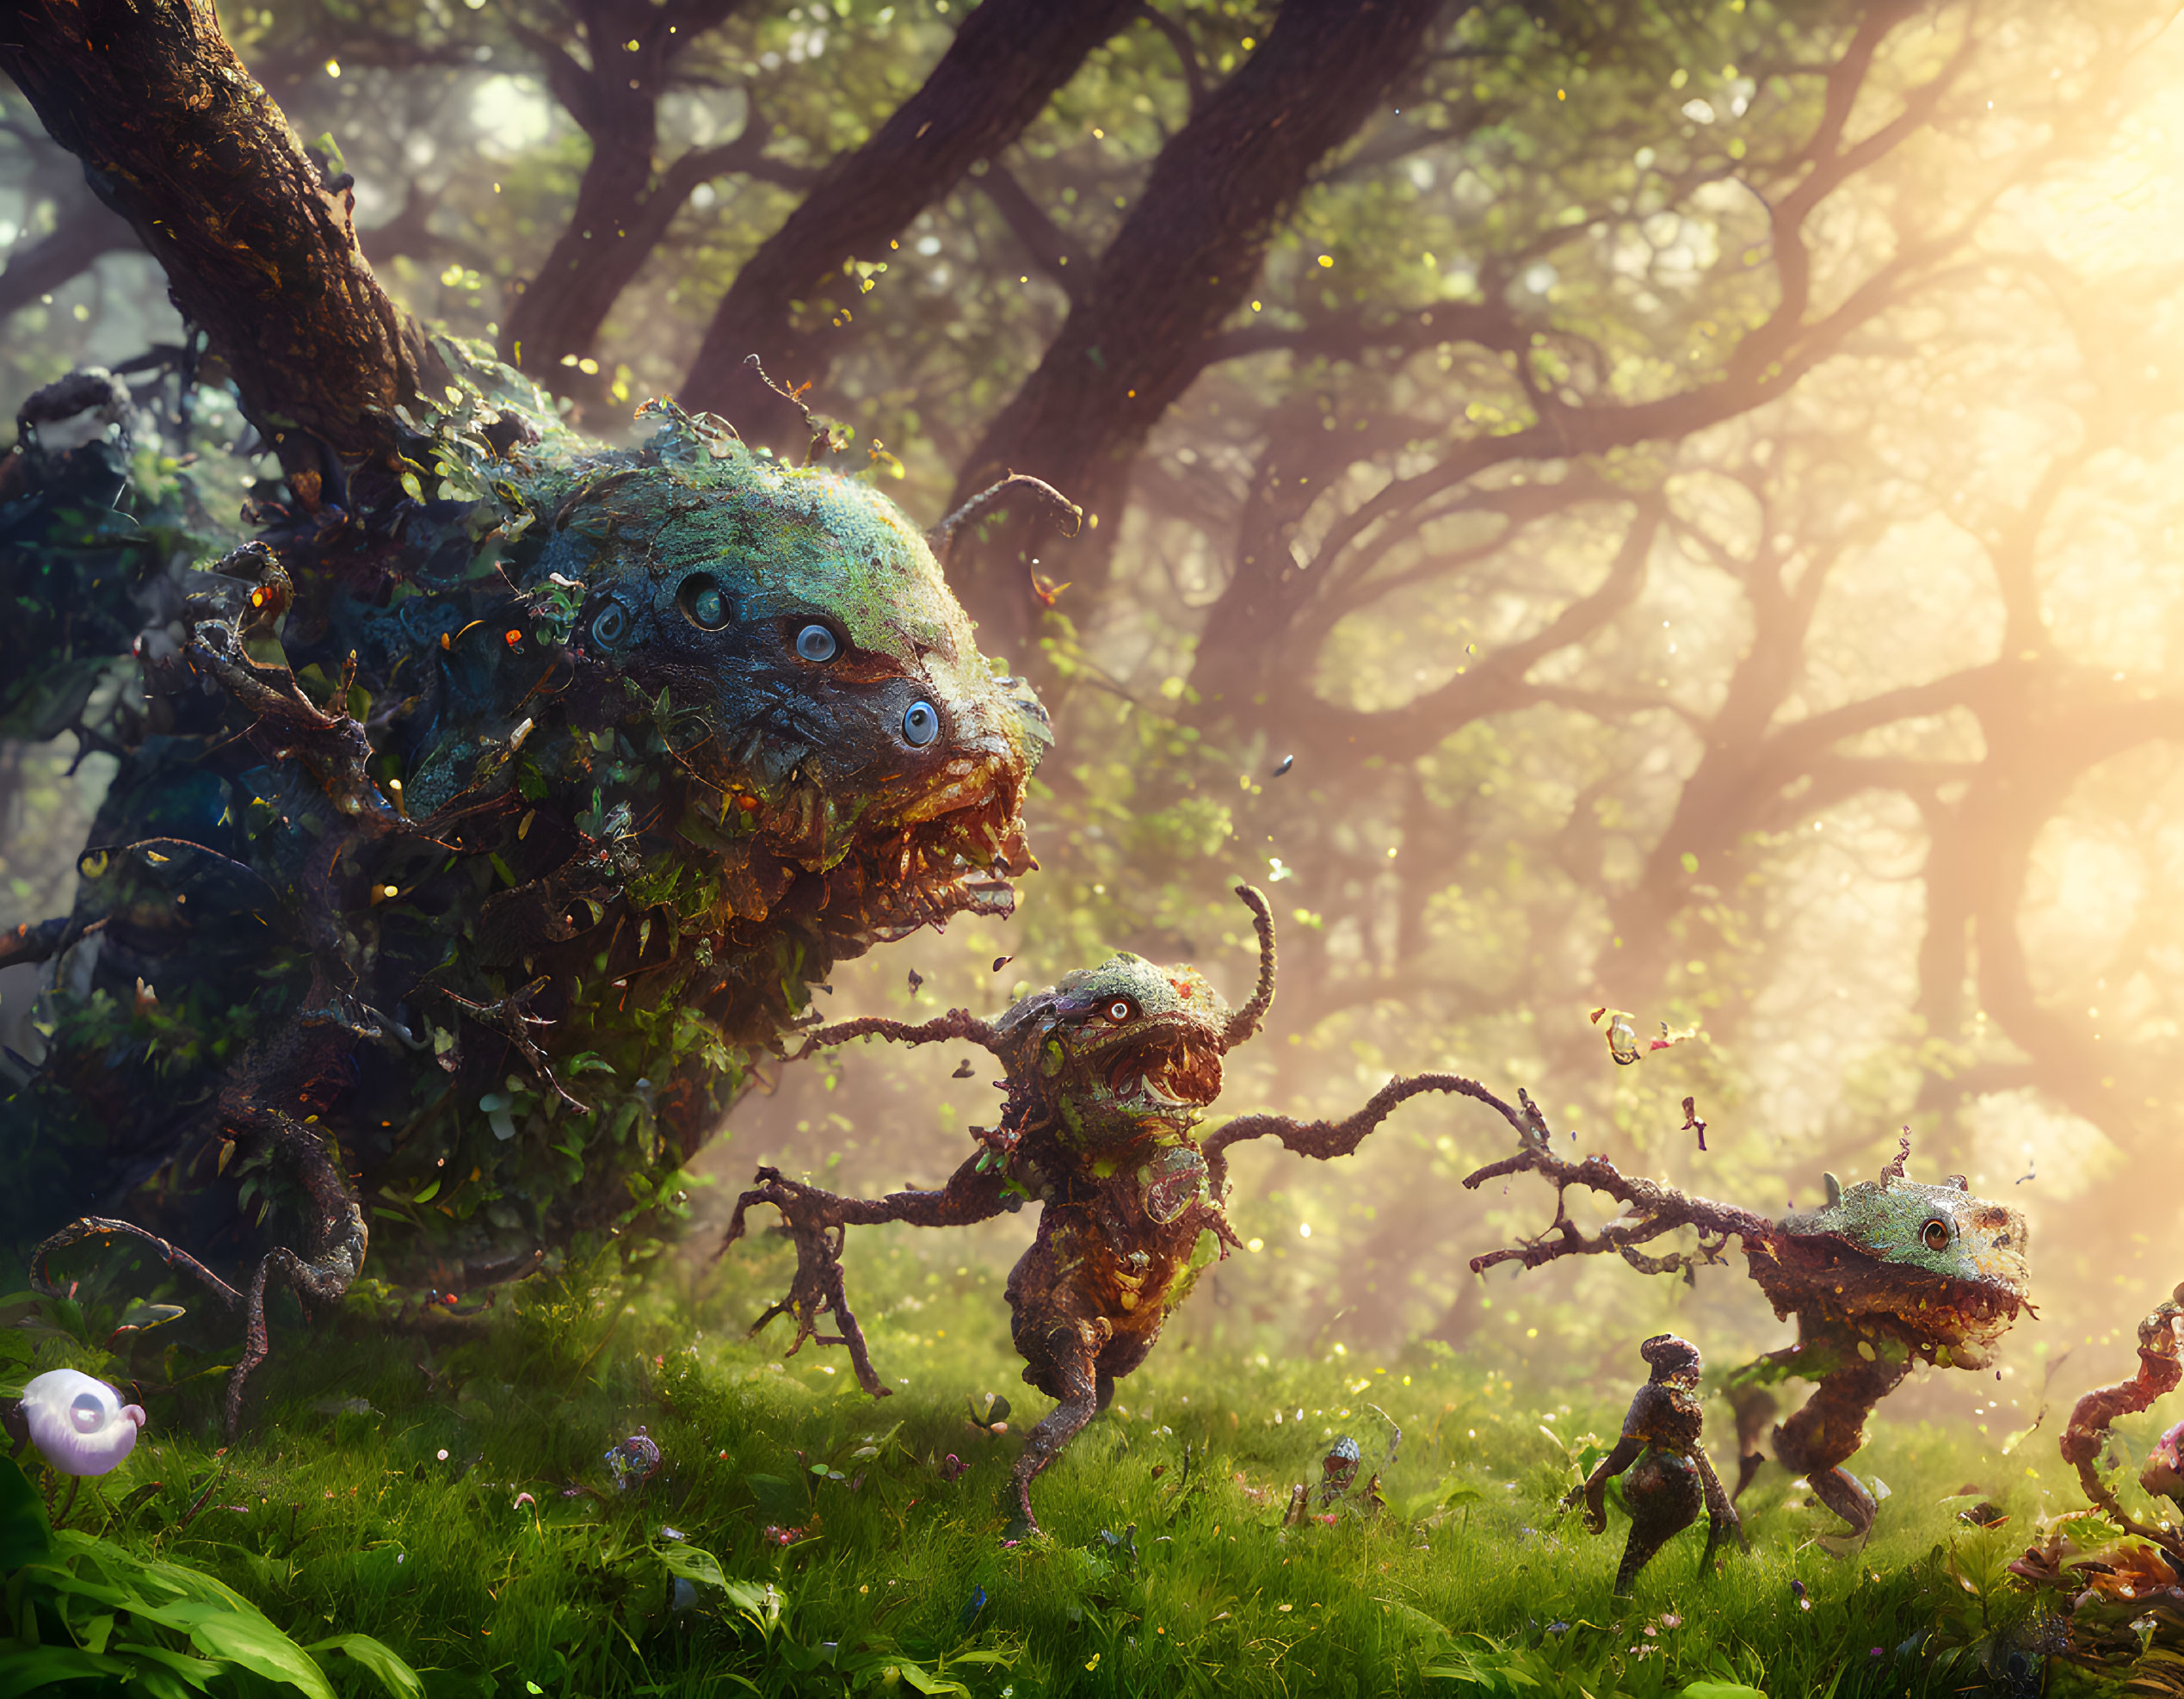 Fantastical forest scene with whimsical tree creatures frolicking under sunlight